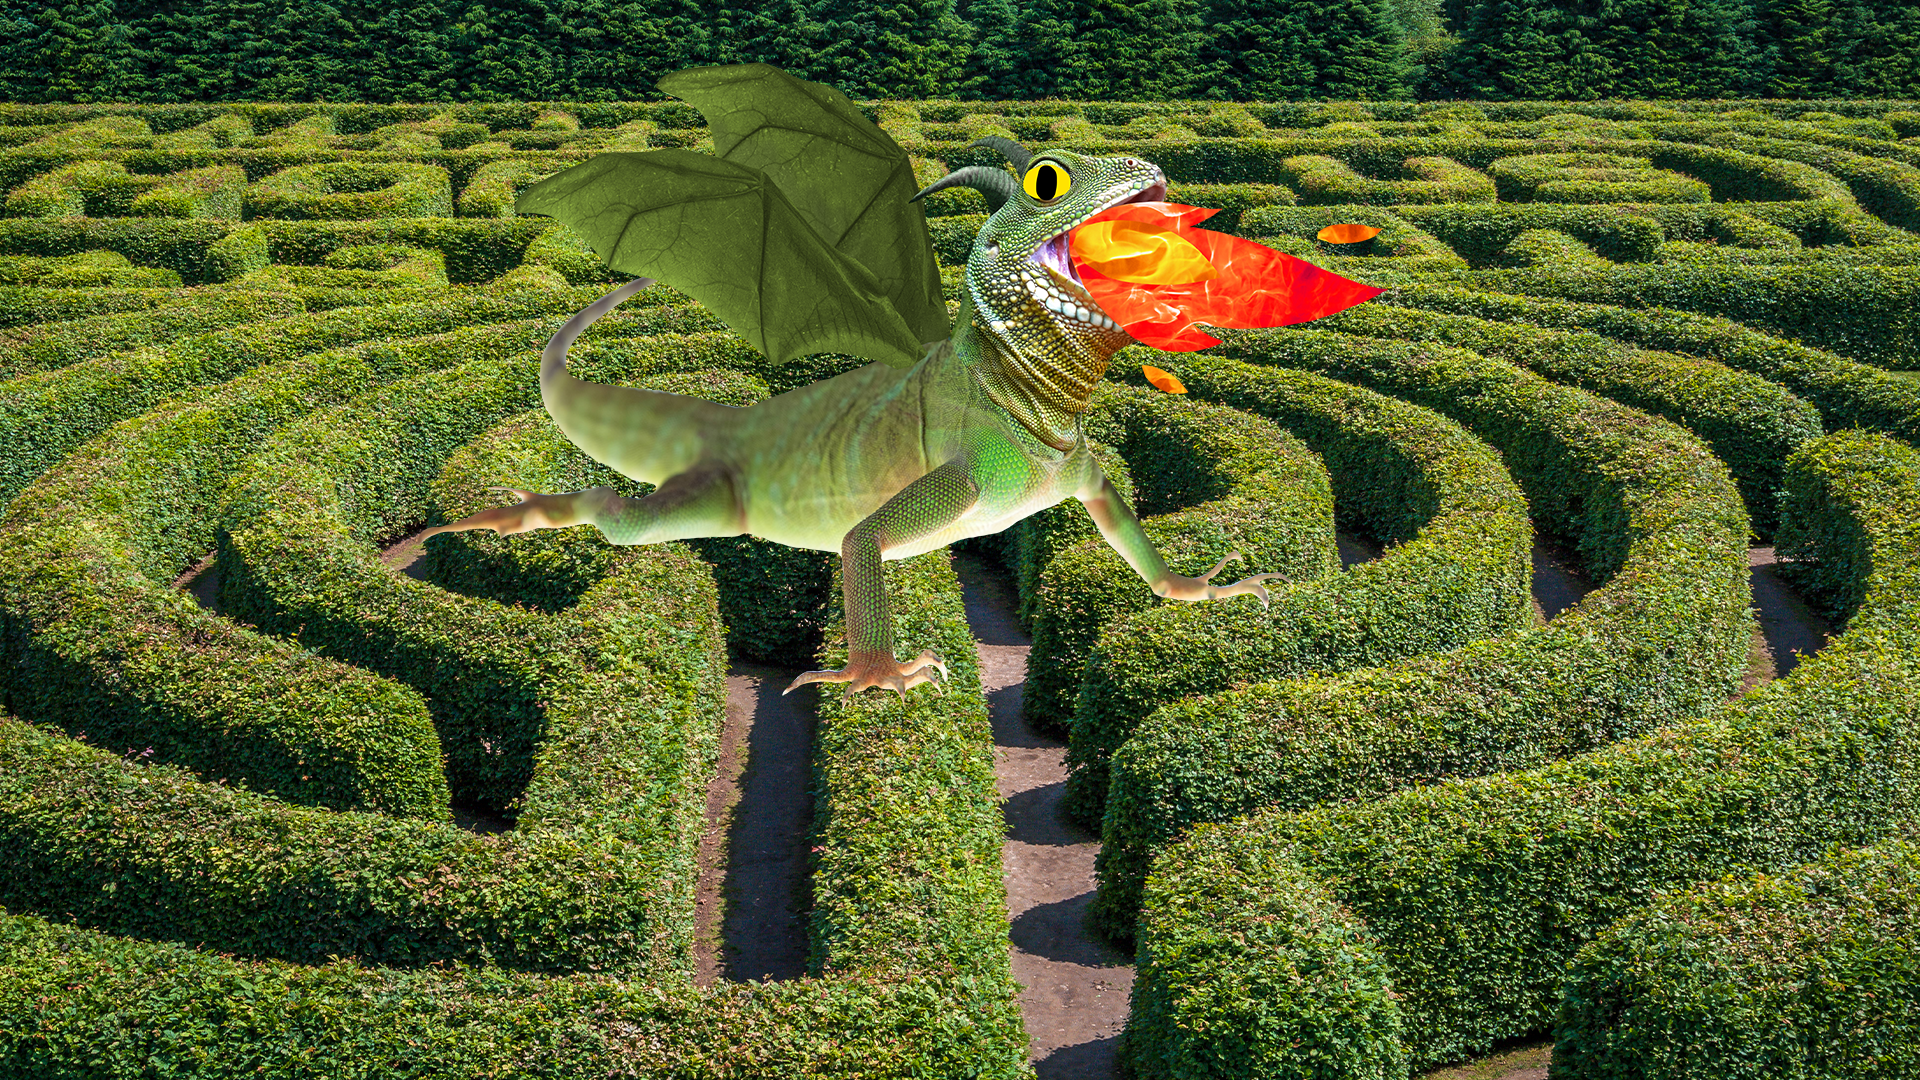 Hedge maze with Beano dragon in the middle